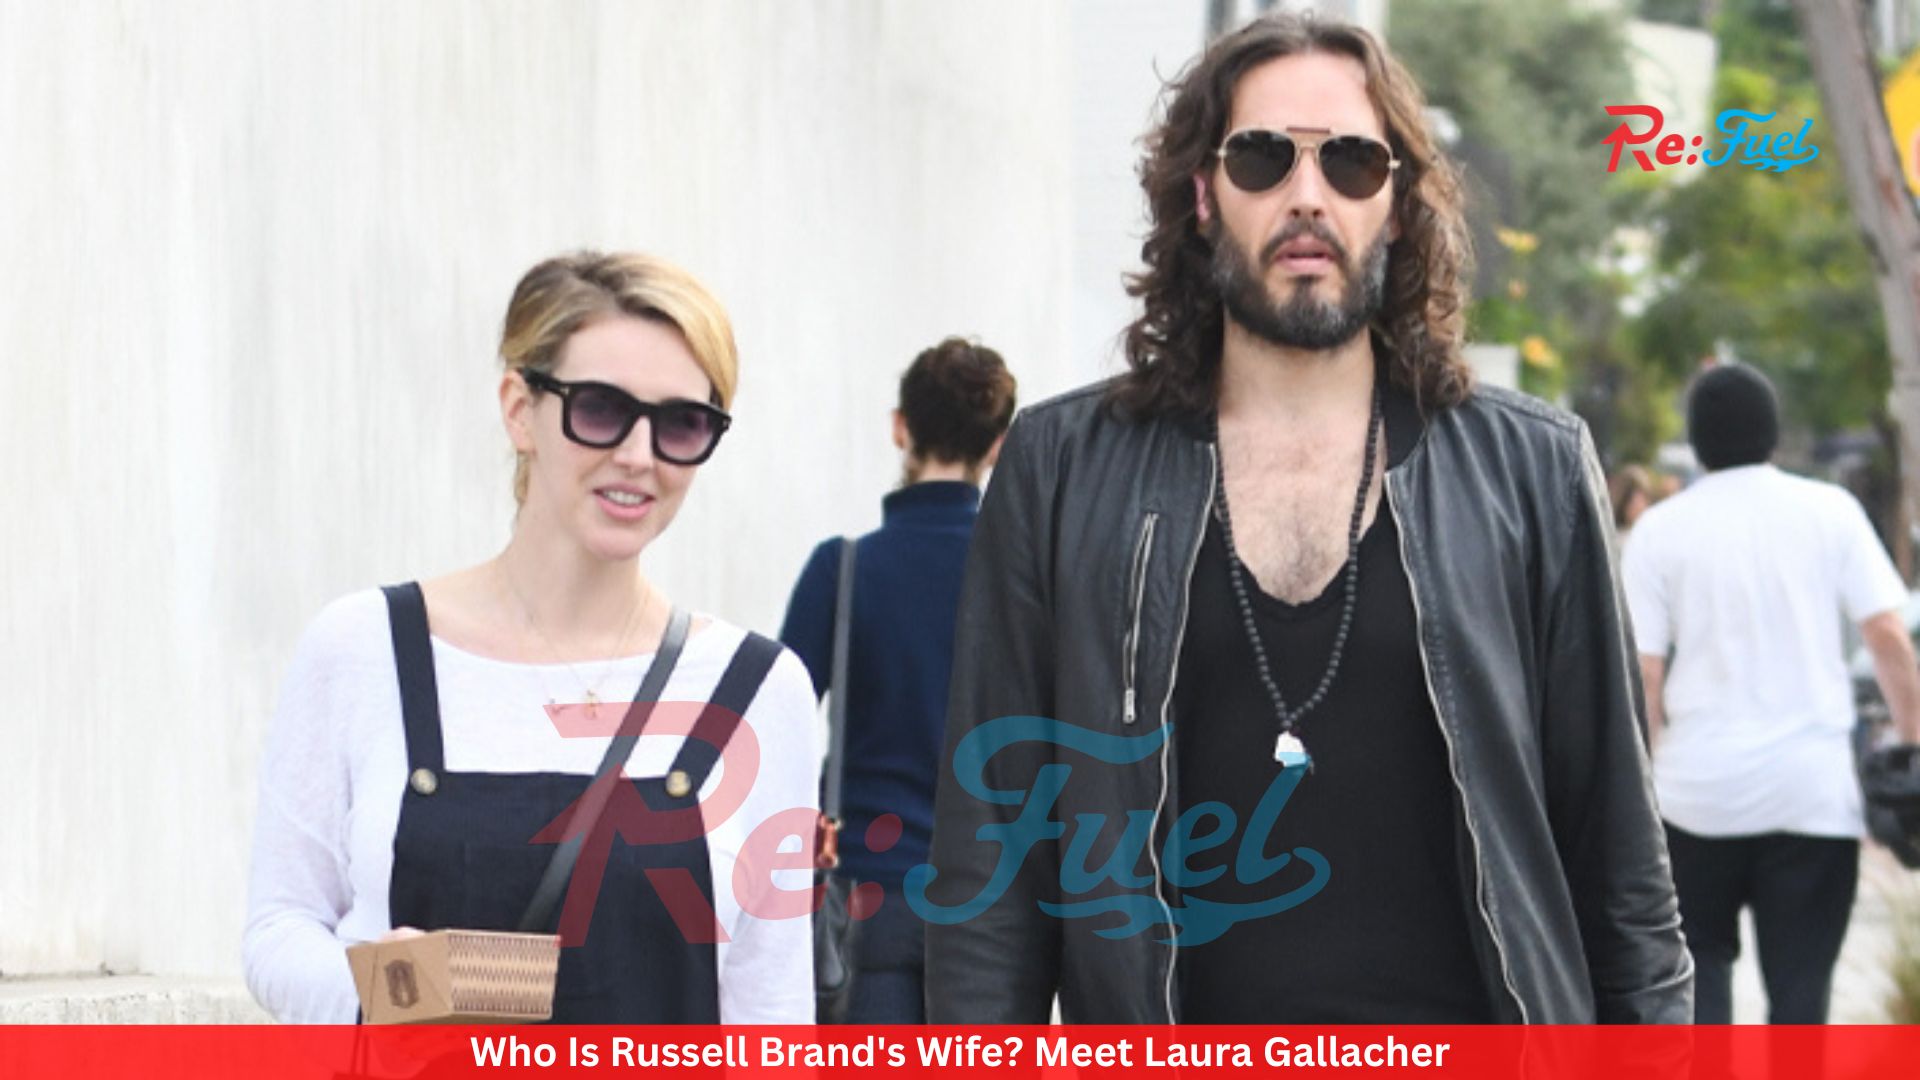 Who Is Russell Brand's Wife? Meet Laura Gallacher